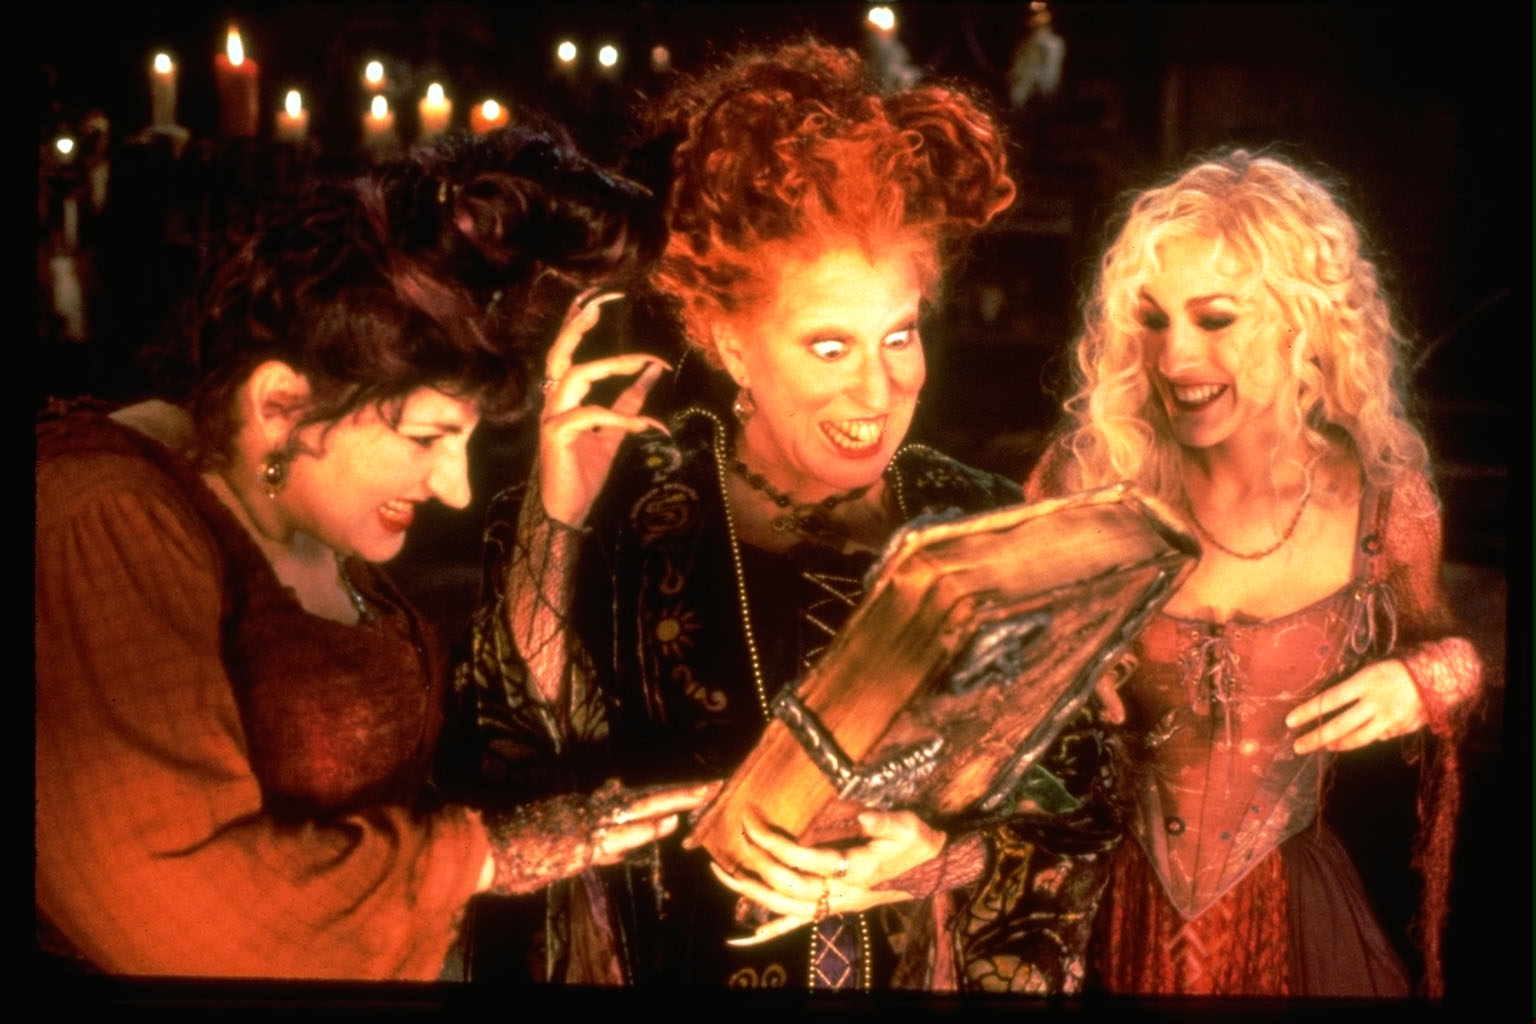 Disney's Hocus Pocus movies play with orange and blue filters as its Halloween colors